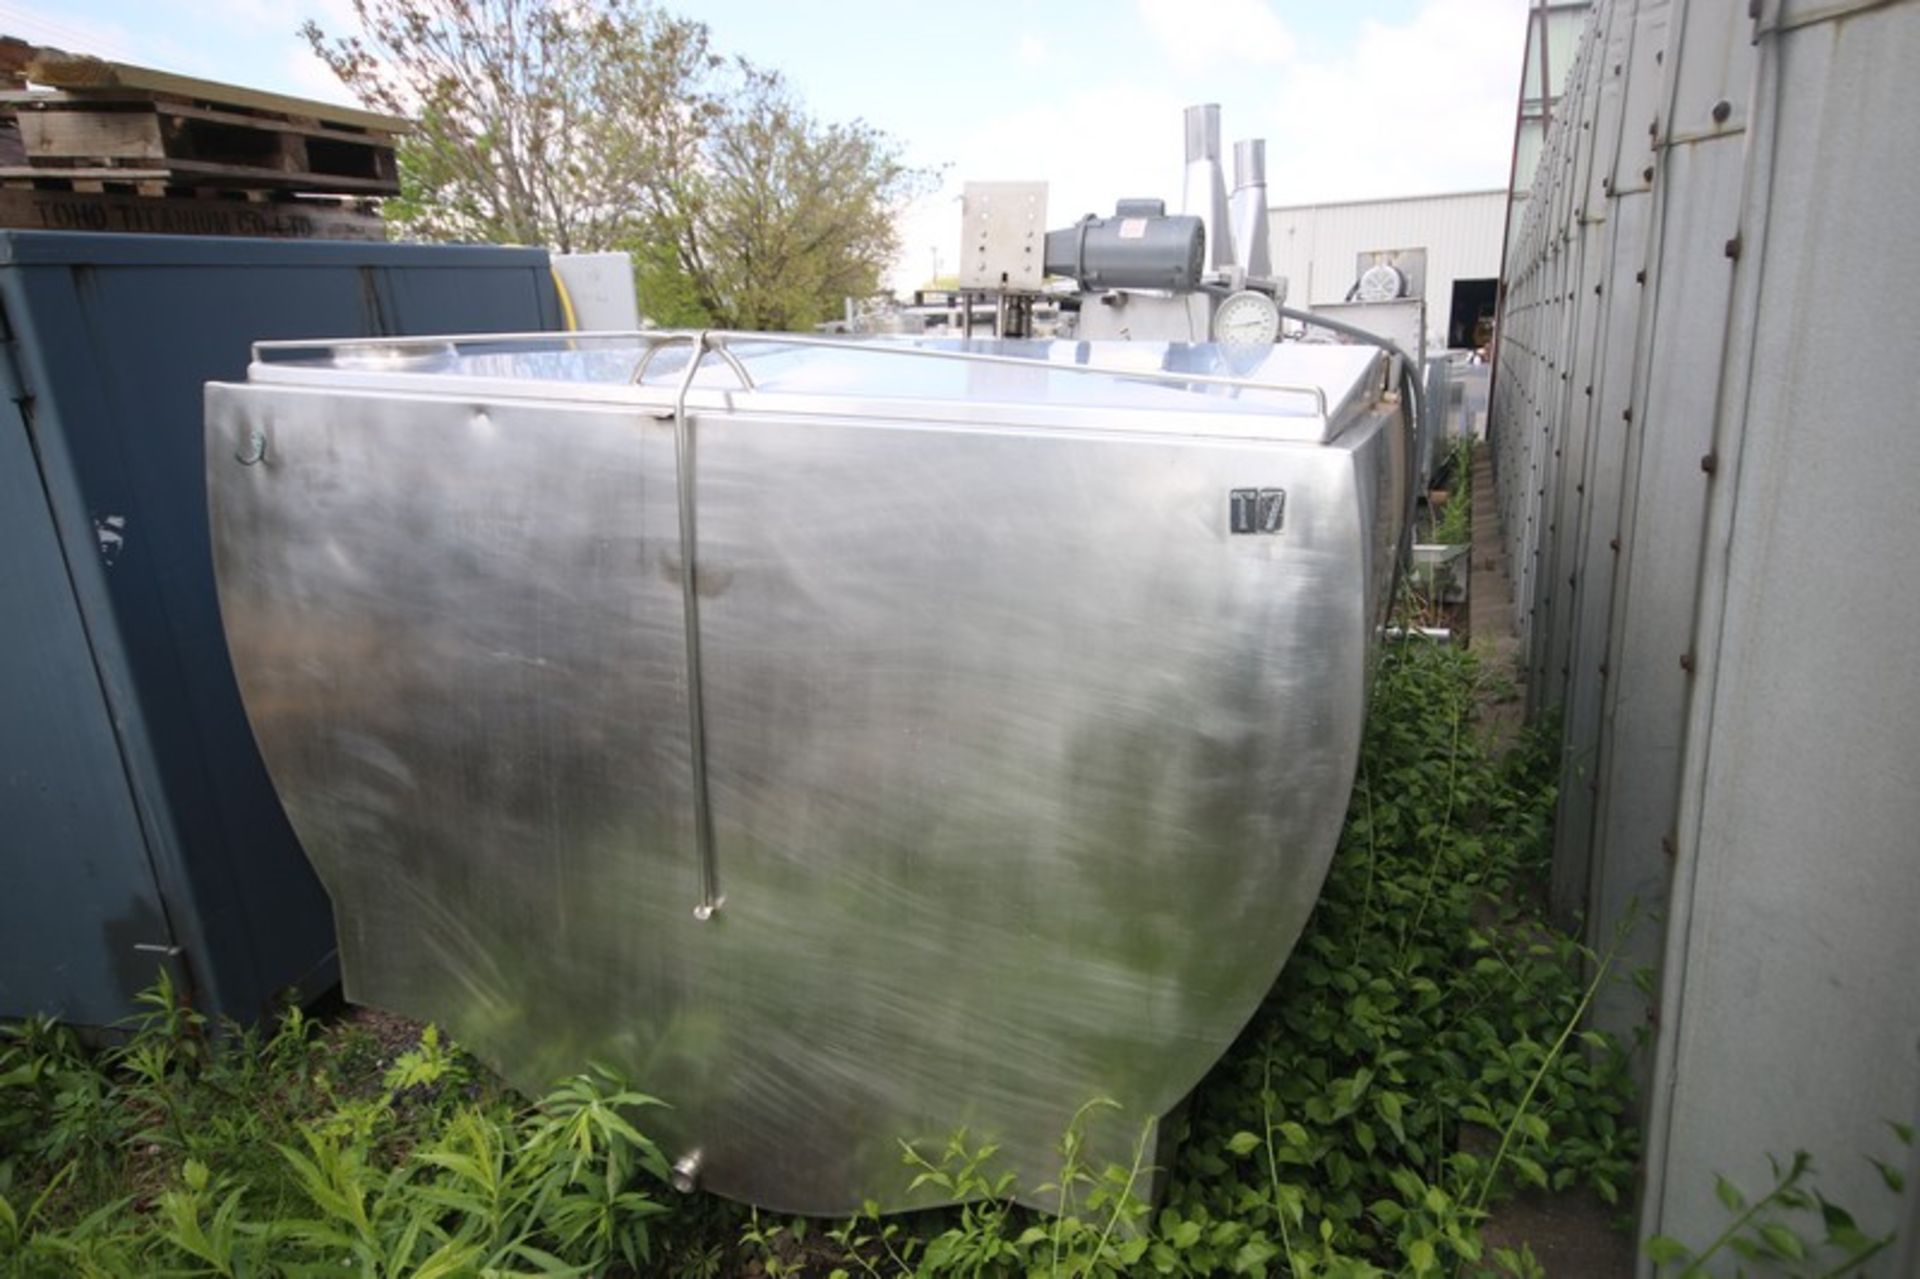 Mueller 1,000 Gal. S/S Farm Tank, with Hinged Lid, M/N M, S/N 32966, with Freon Jacket, 4-Prop - Image 4 of 9